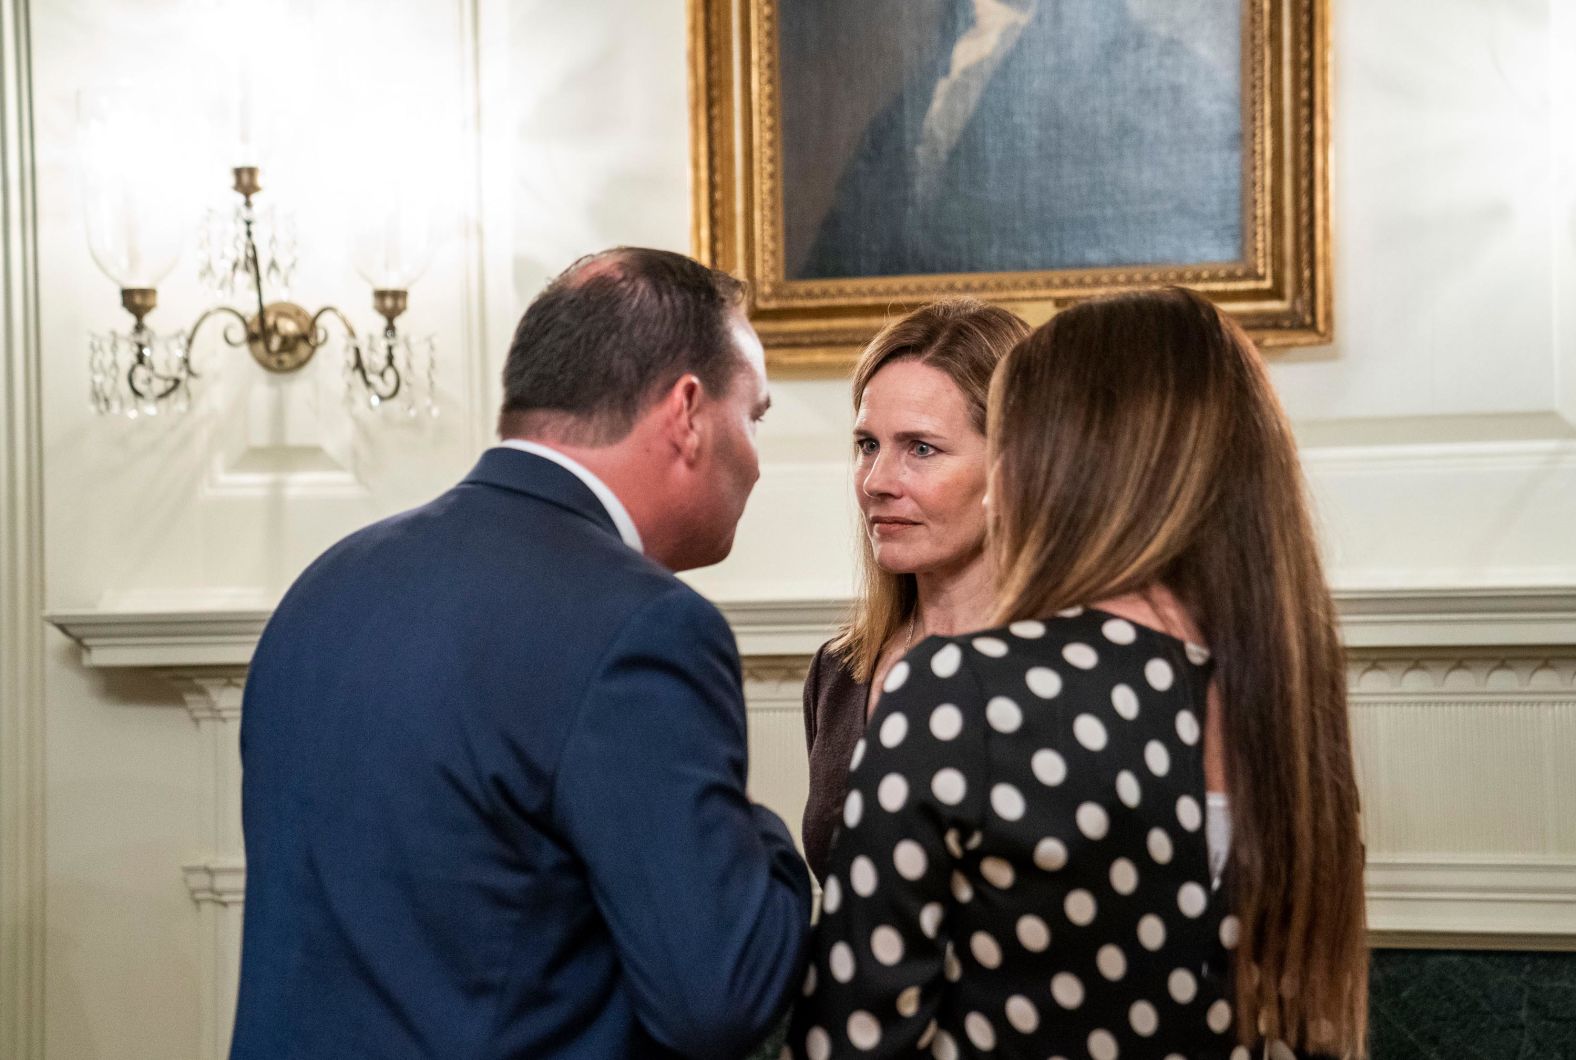 US Sen. Mike Lee and his wife, Sharon, chat with Barrett during <a href="index.php?page=&url=https%3A%2F%2Fwww.cnn.com%2F2020%2F10%2F04%2Fpolitics%2Fgallery%2Fbarrett-announcement-inside-white-house-0926%2Findex.html" target="_blank">a private reception inside the White House</a> after Barrett's nomination ceremony on September 26. Lee later tested positive for the coronavirus.